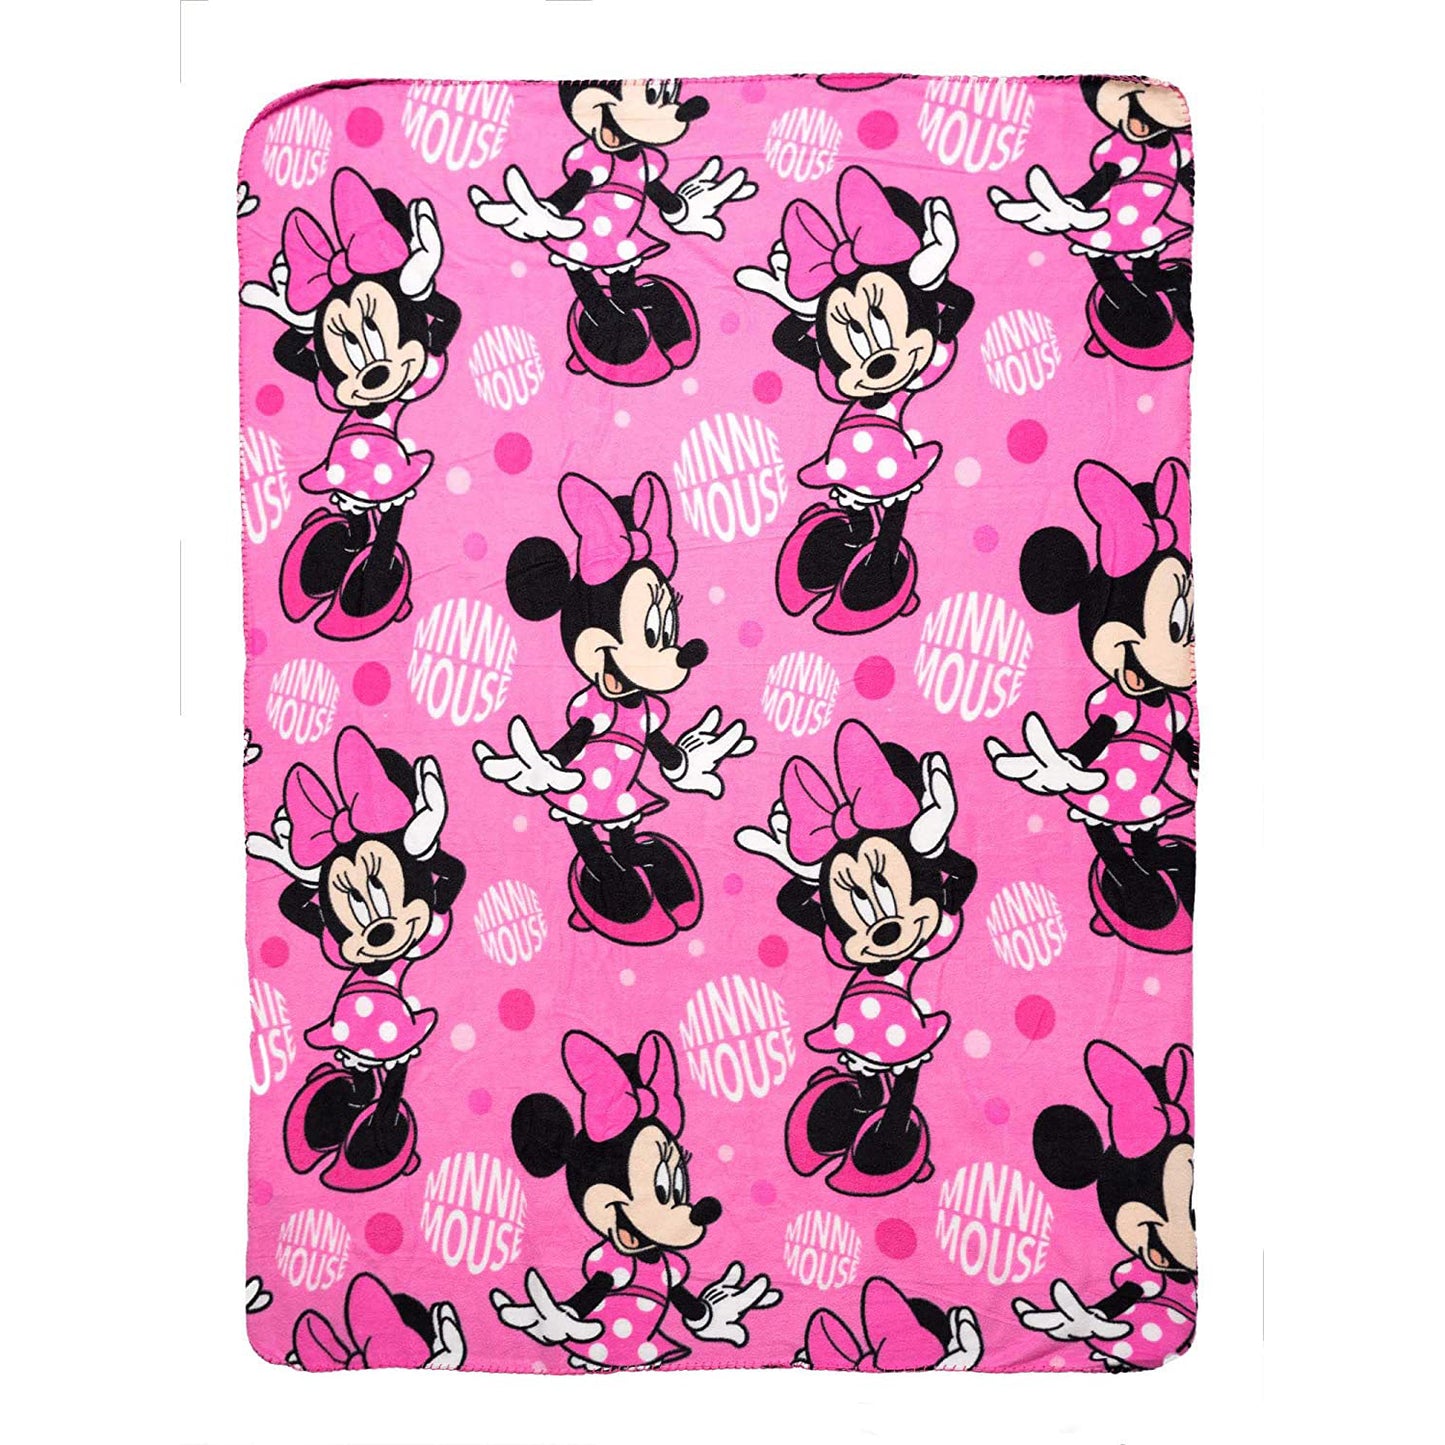 MINNIE MOUSE Kids' Fleece Throw Blanket (Pack of 3)